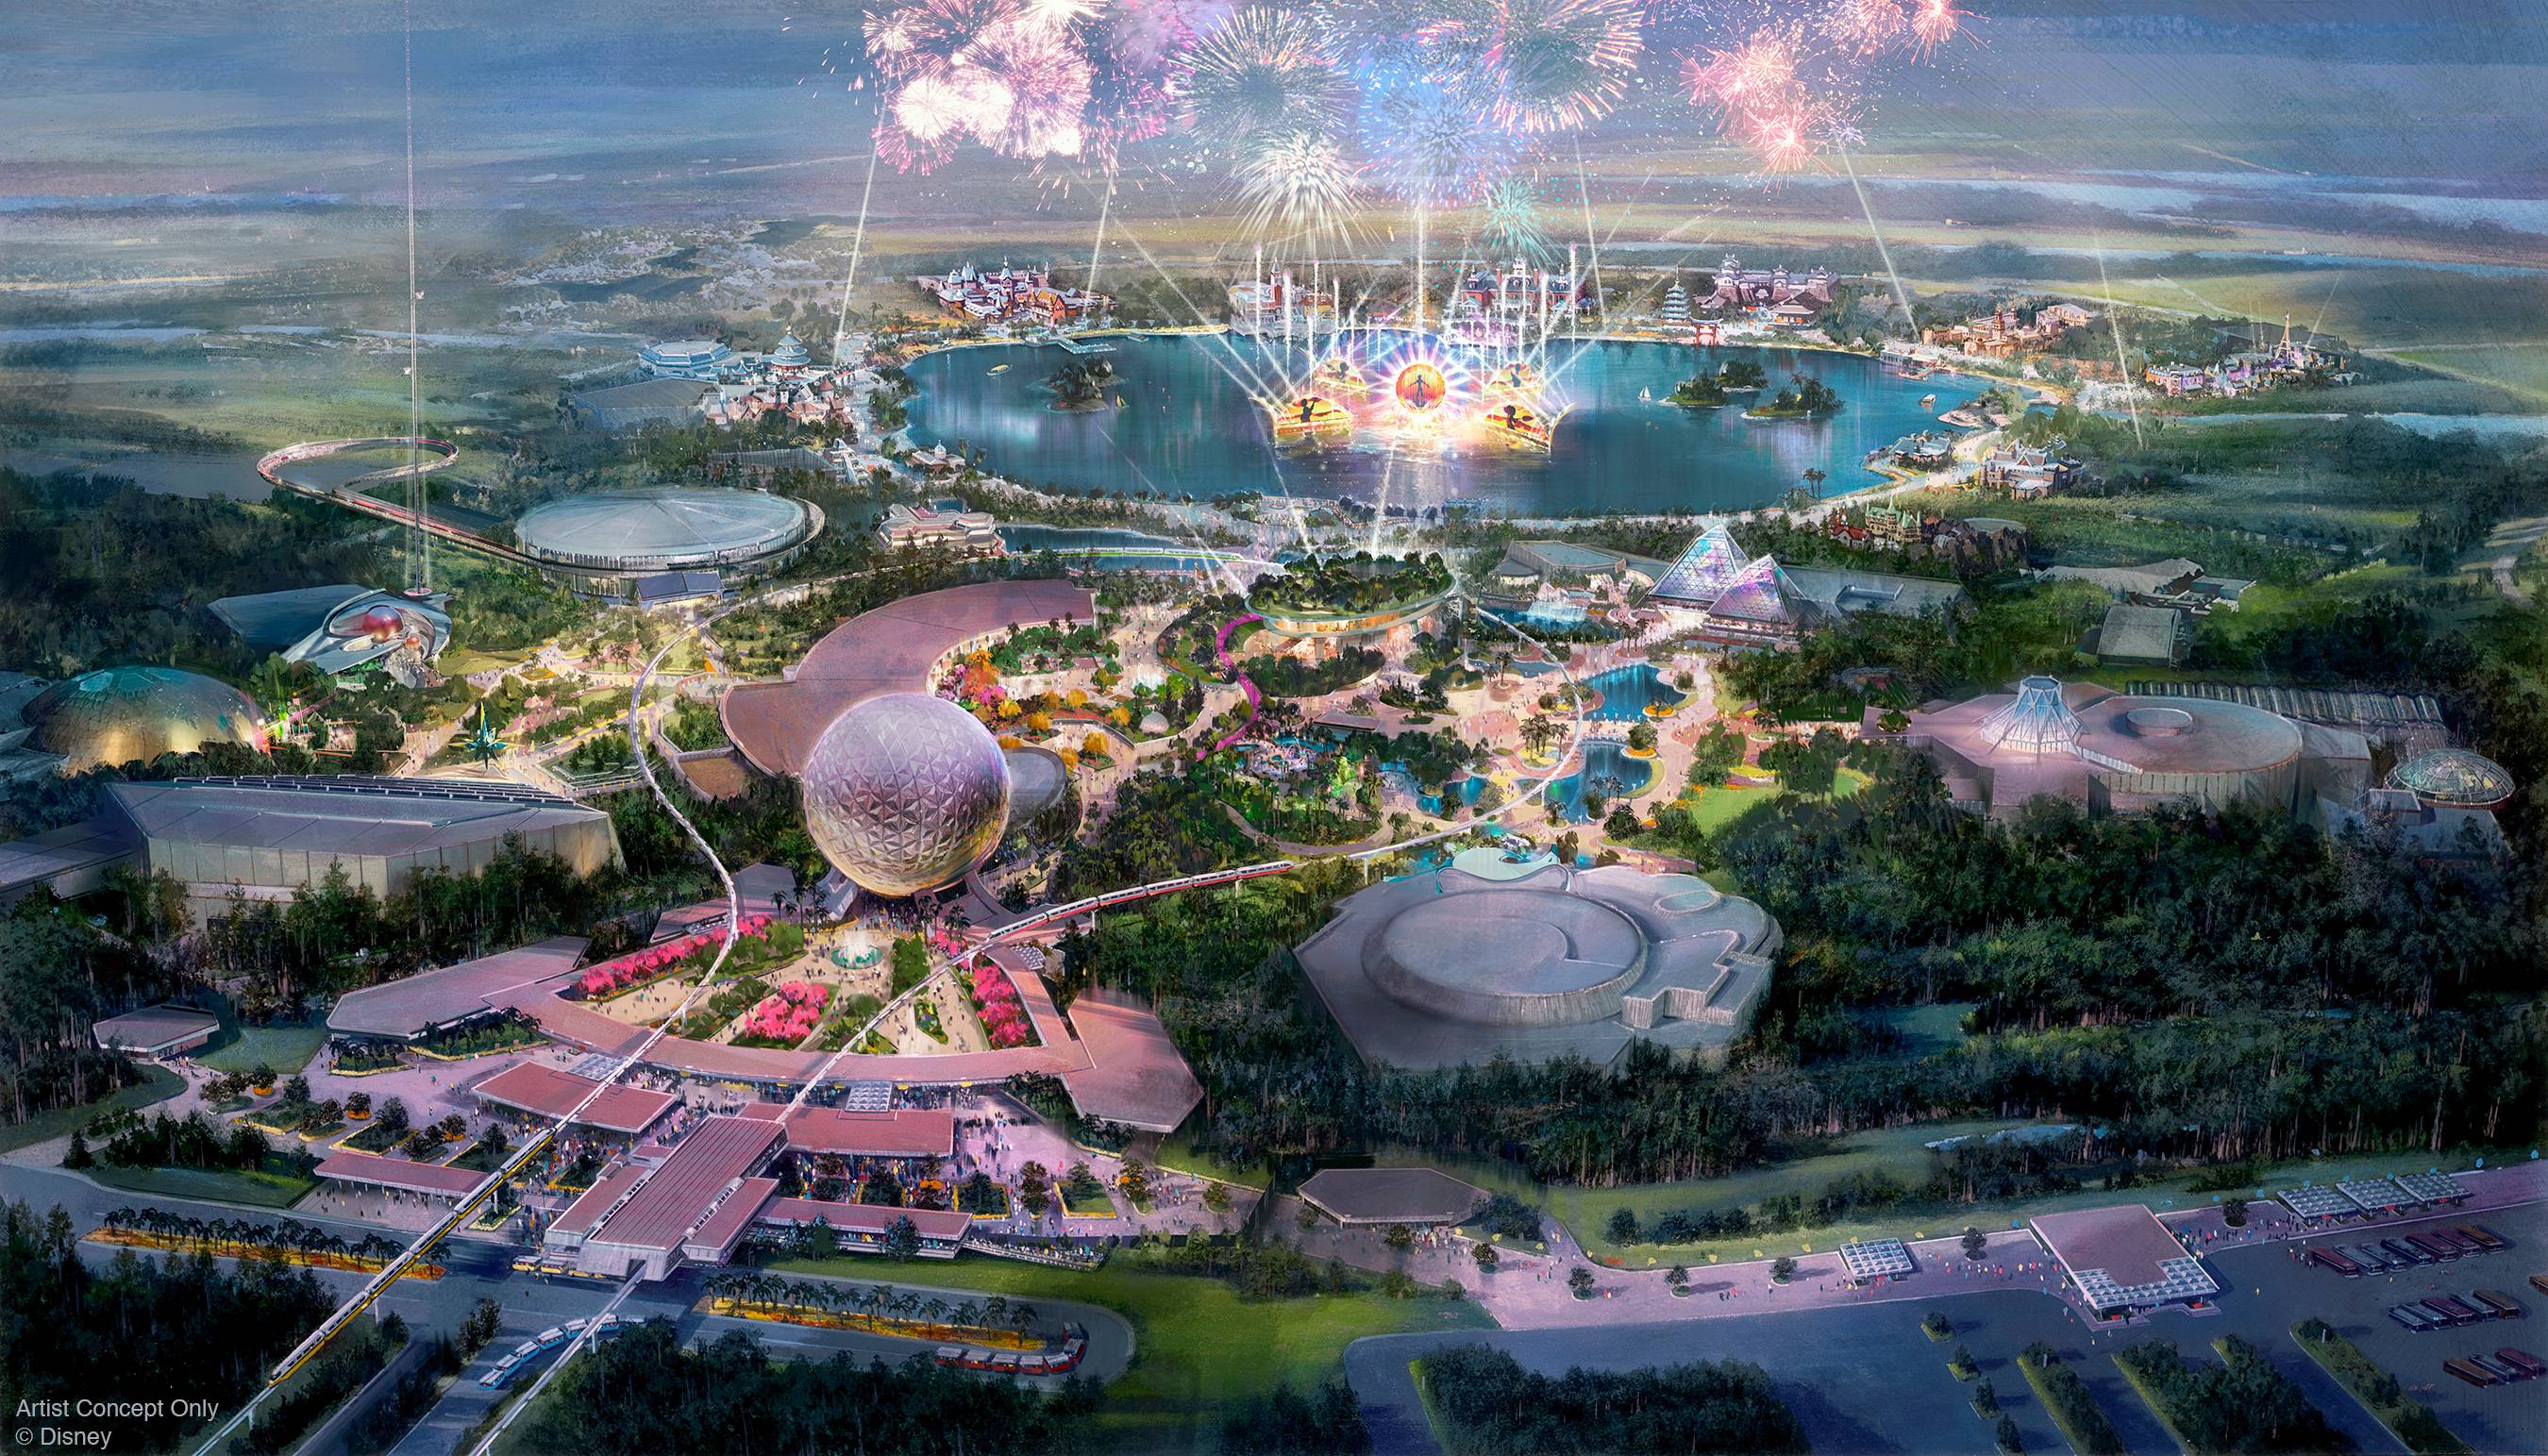 Disney confirms multiple EPCOT projects are paused